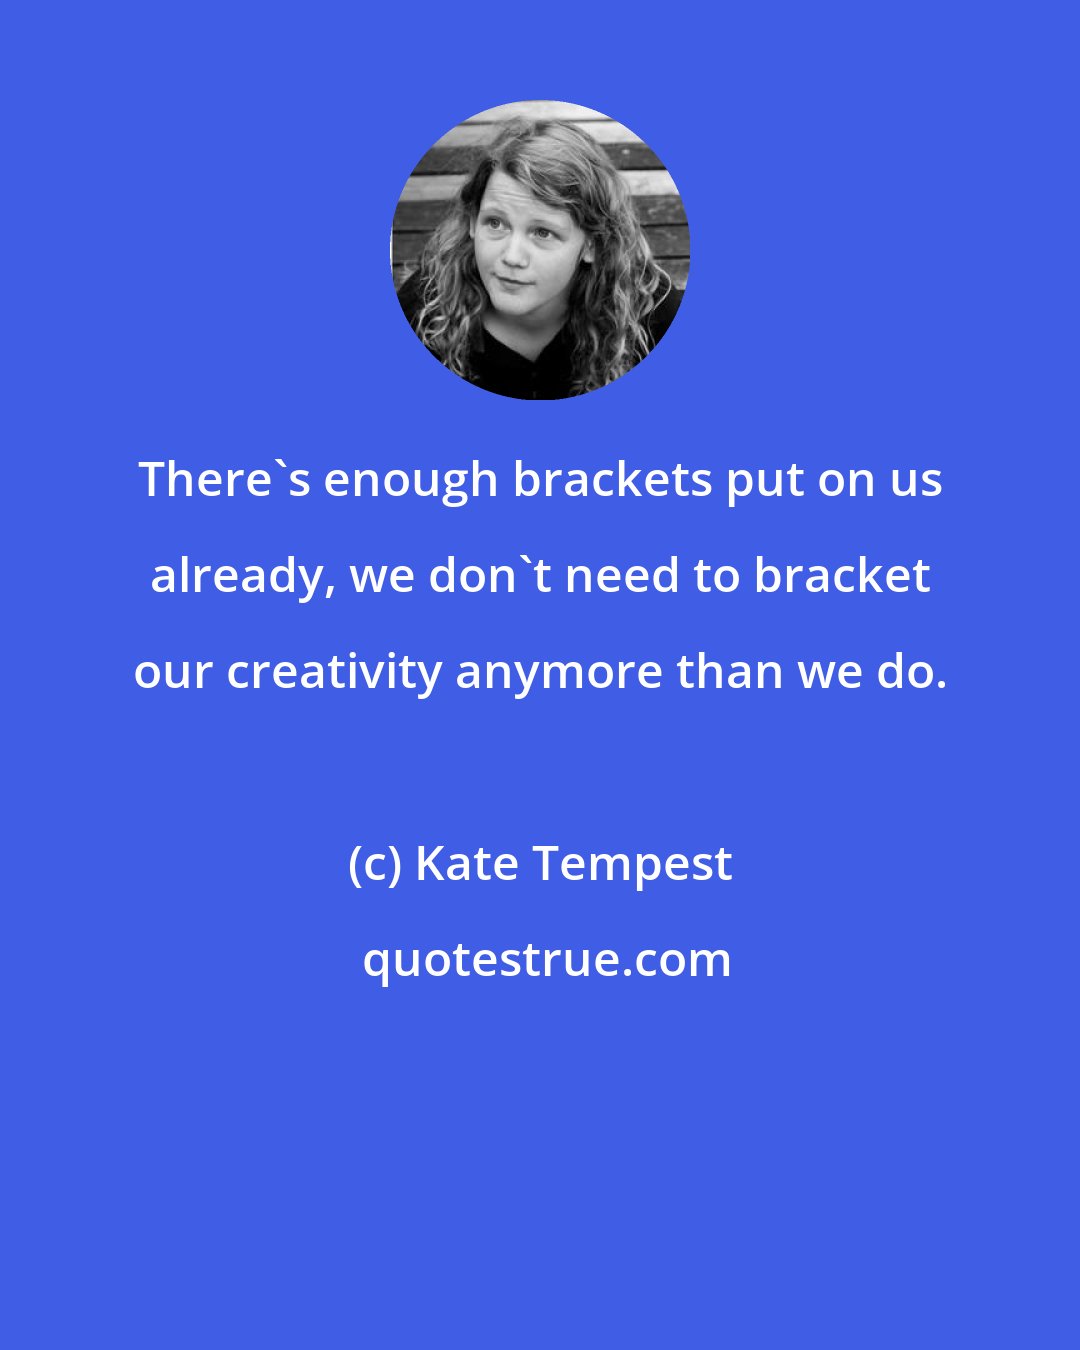 Kate Tempest: There's enough brackets put on us already, we don't need to bracket our creativity anymore than we do.